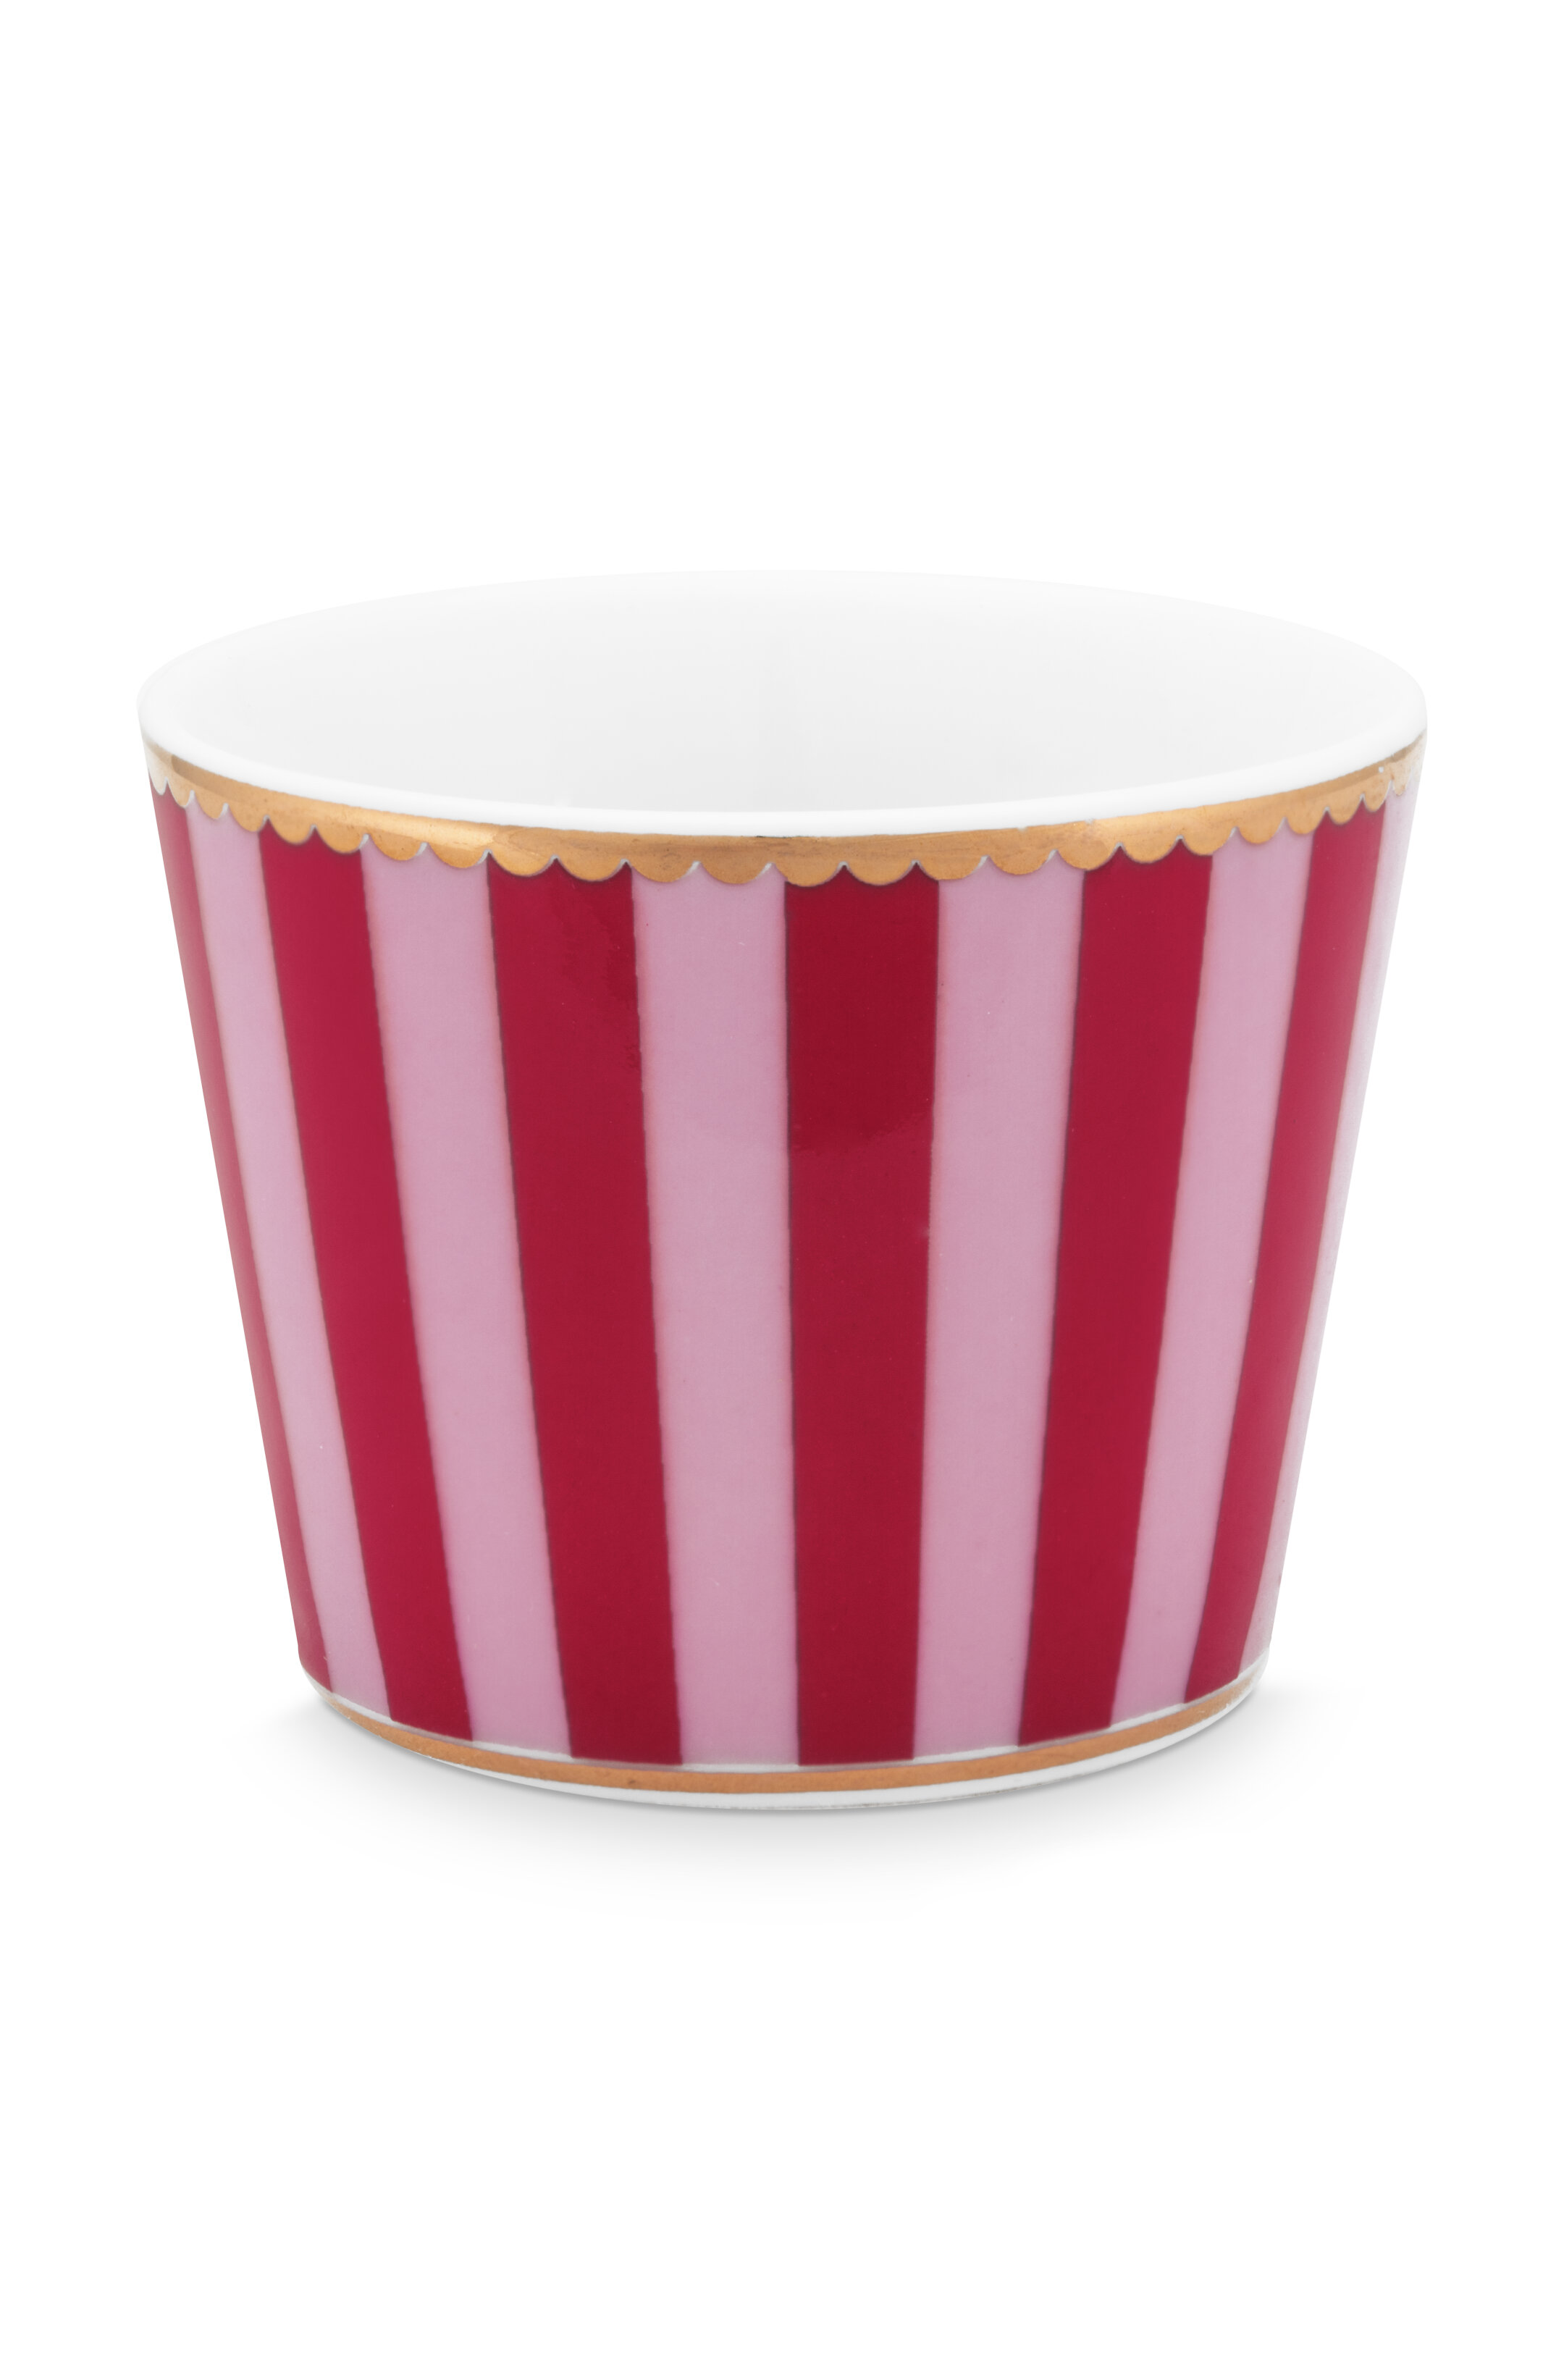 Pip Studio Love Birds Egg Cup Stripes Red-Pink